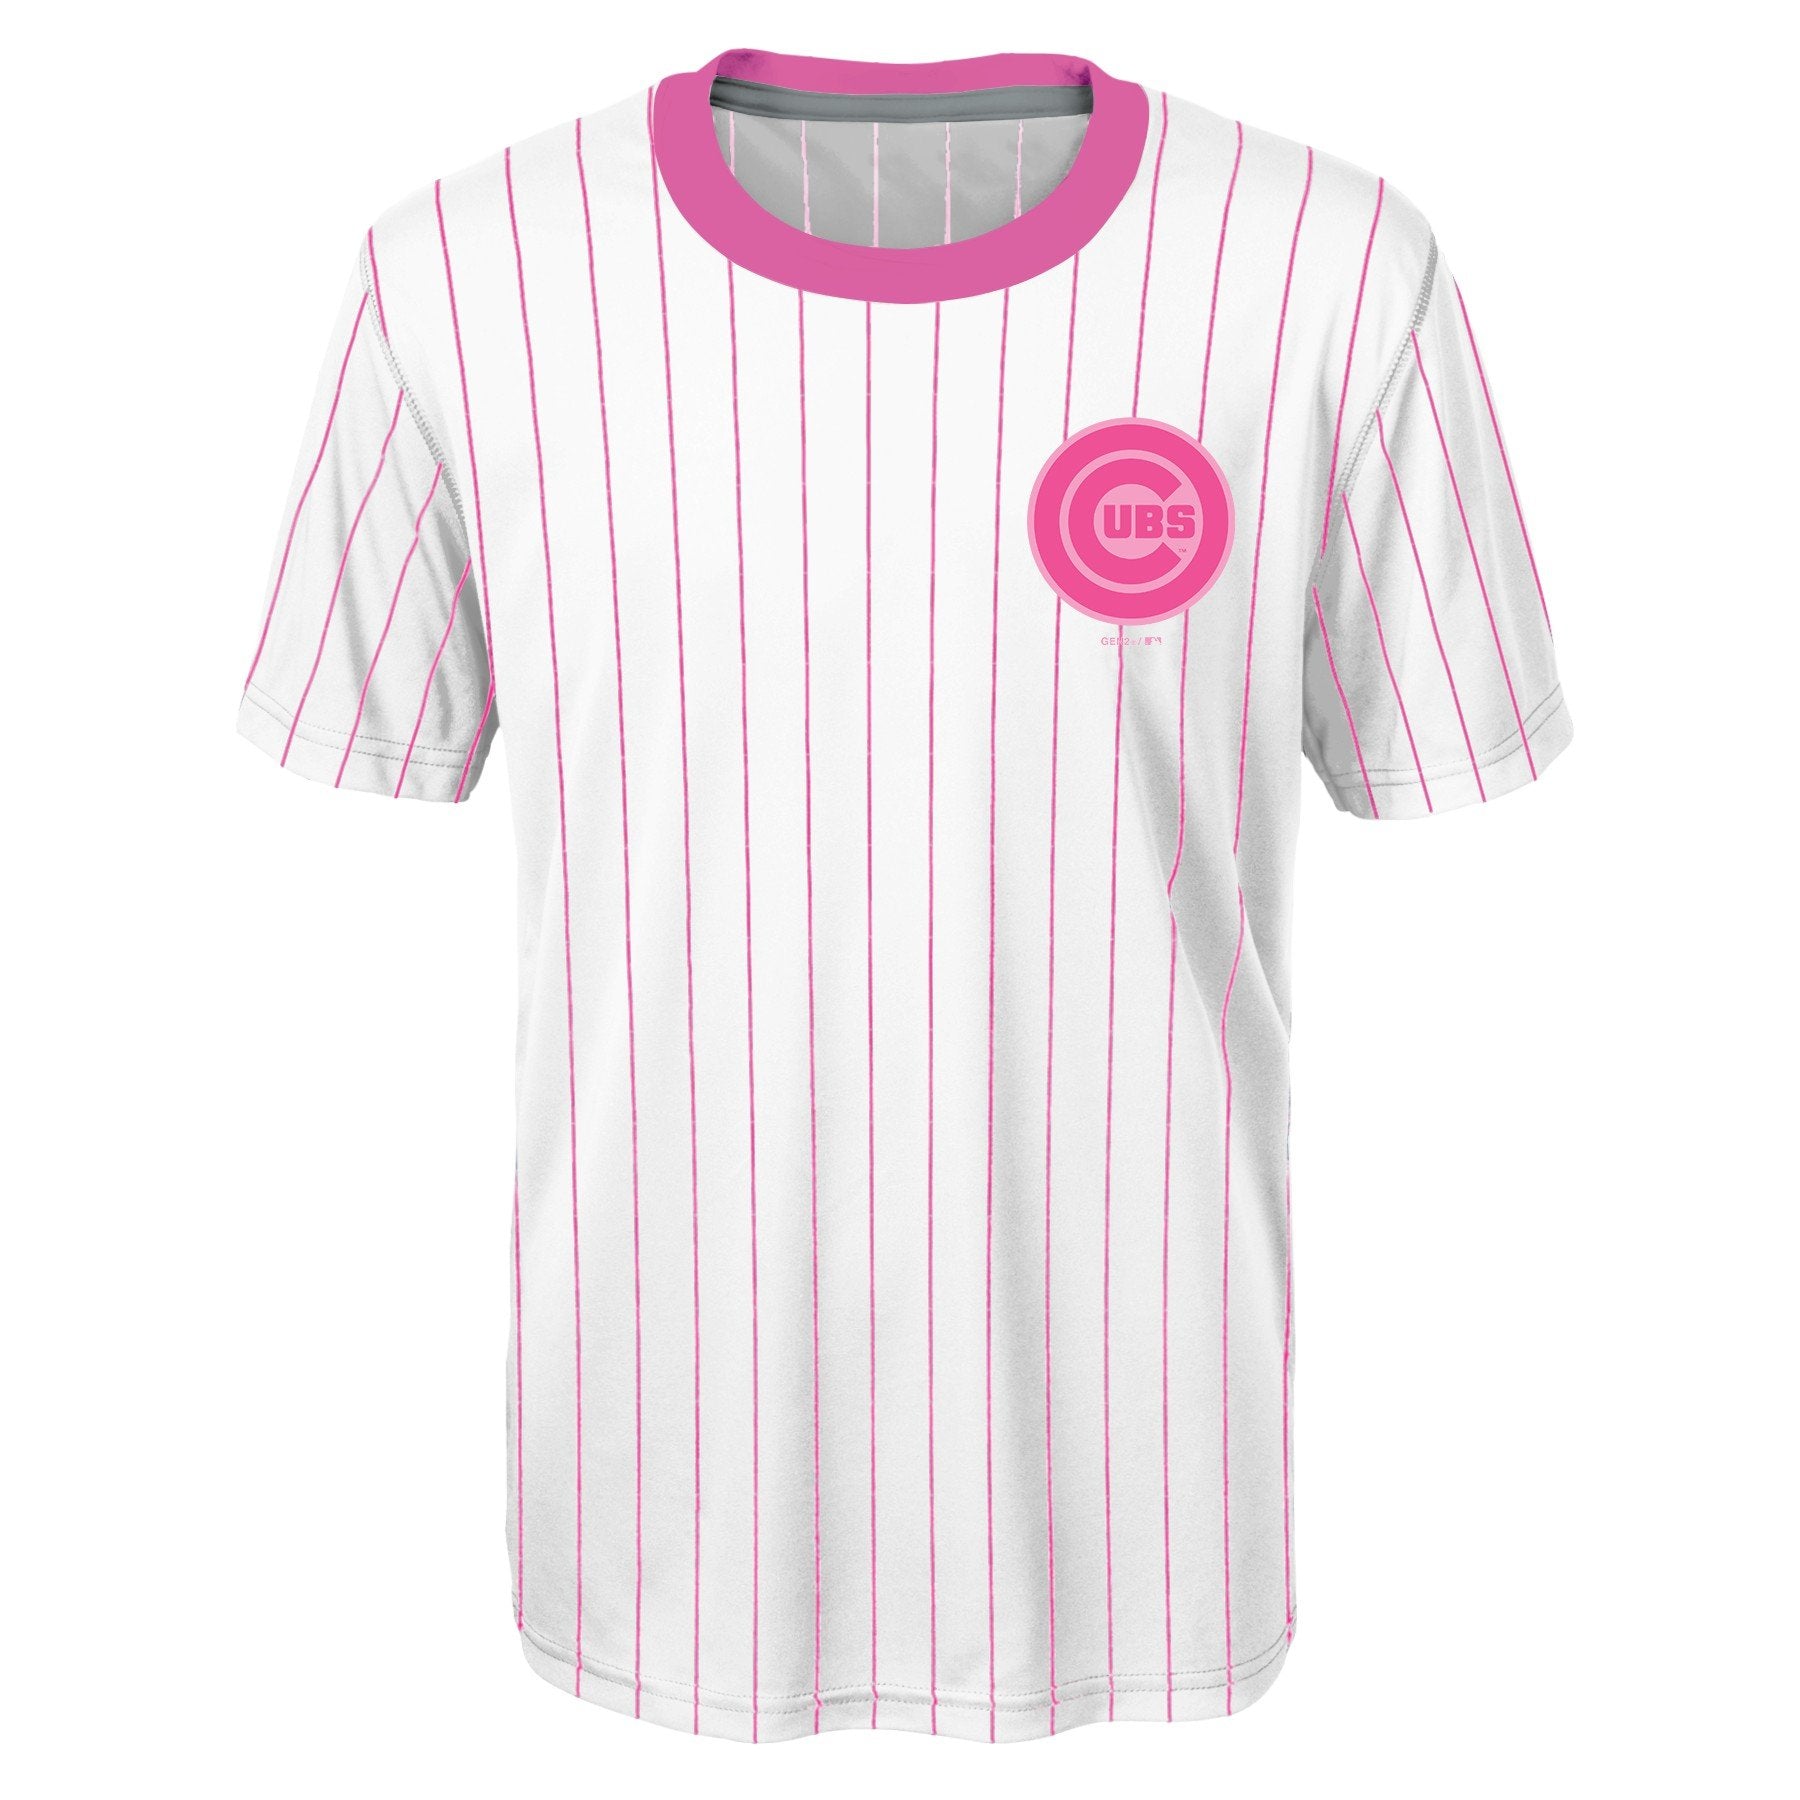 Outer Stuff Chicago Cubs Nike Youth Pink Pinstripe Performance Tee L